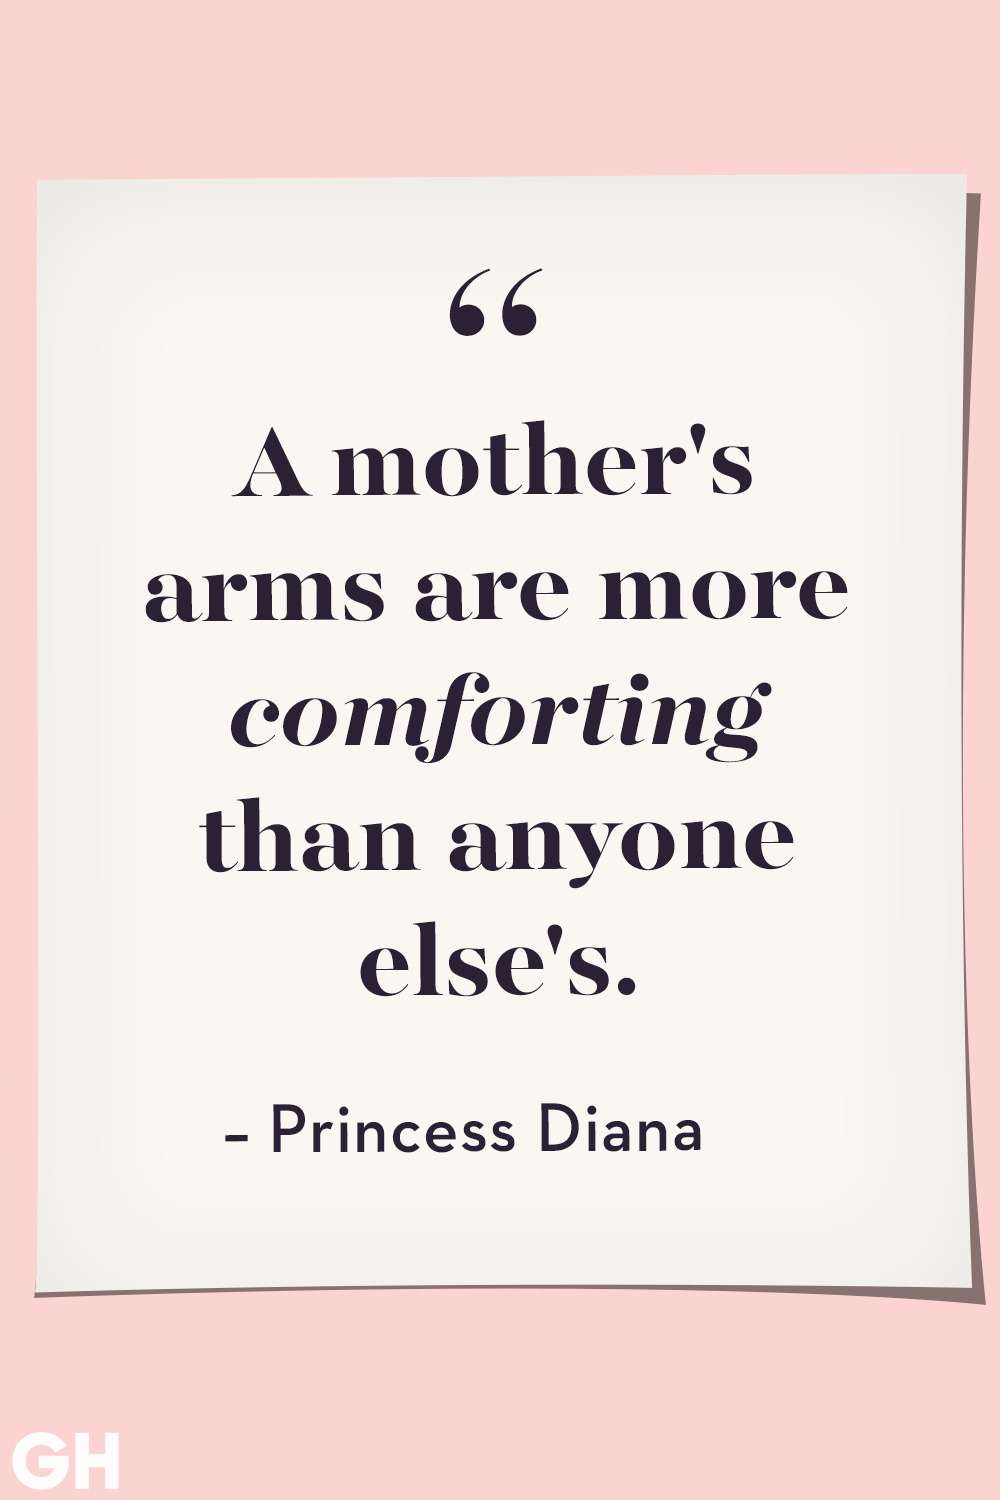 a mother’s arms are more comforting than anyone else’s. princess diana